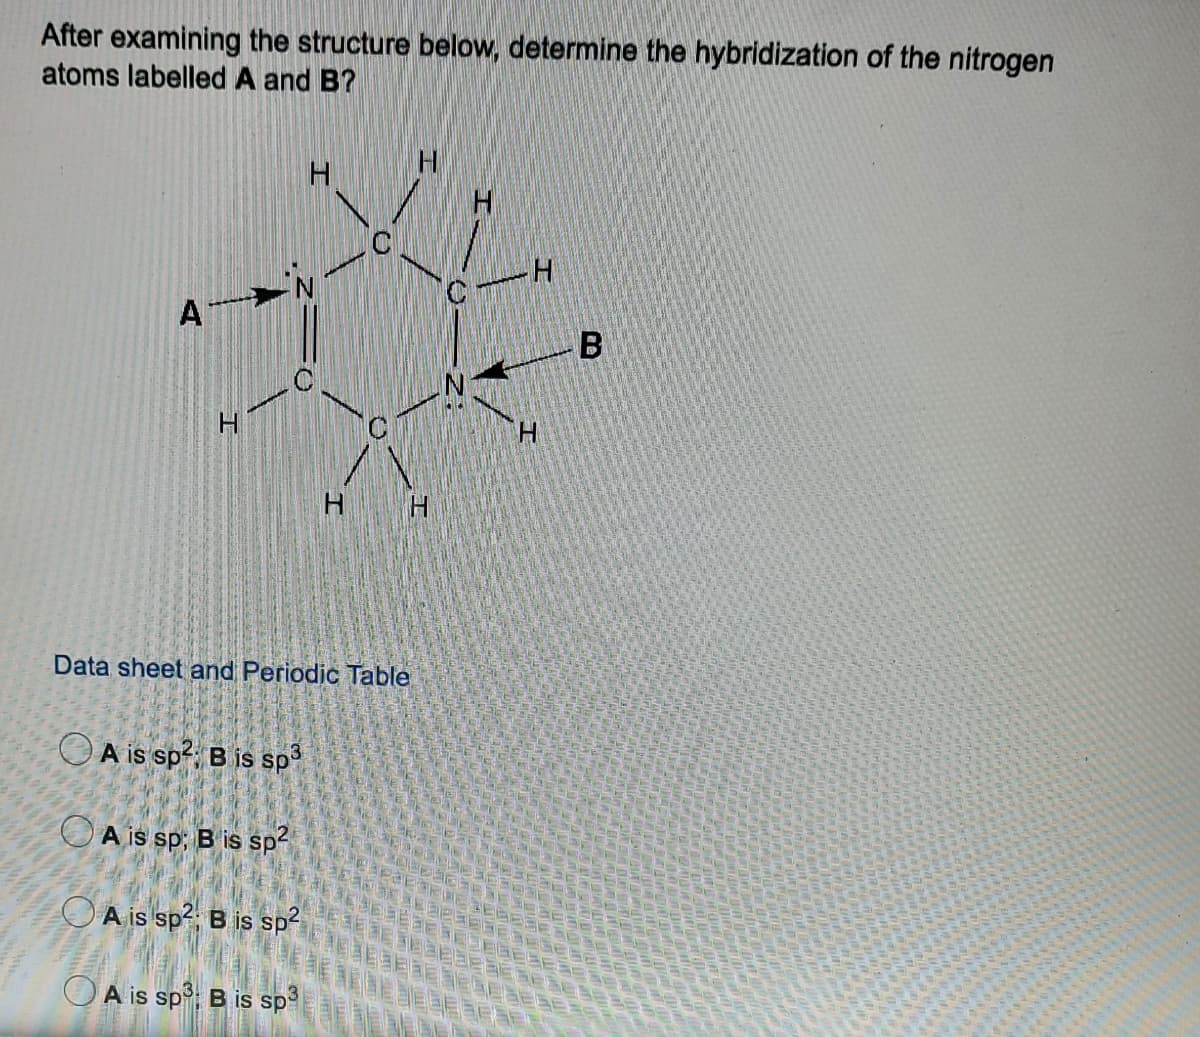 After examining the structure below, determine the hybridization of the nitrogen
atoms labelled A and B?
A
H.
H H
Data sheet and Periodic Table
A is sp2, B is sp
O A is sp; B is sp-
O A is sp?, B is sp?
OA is sp; B is sp
